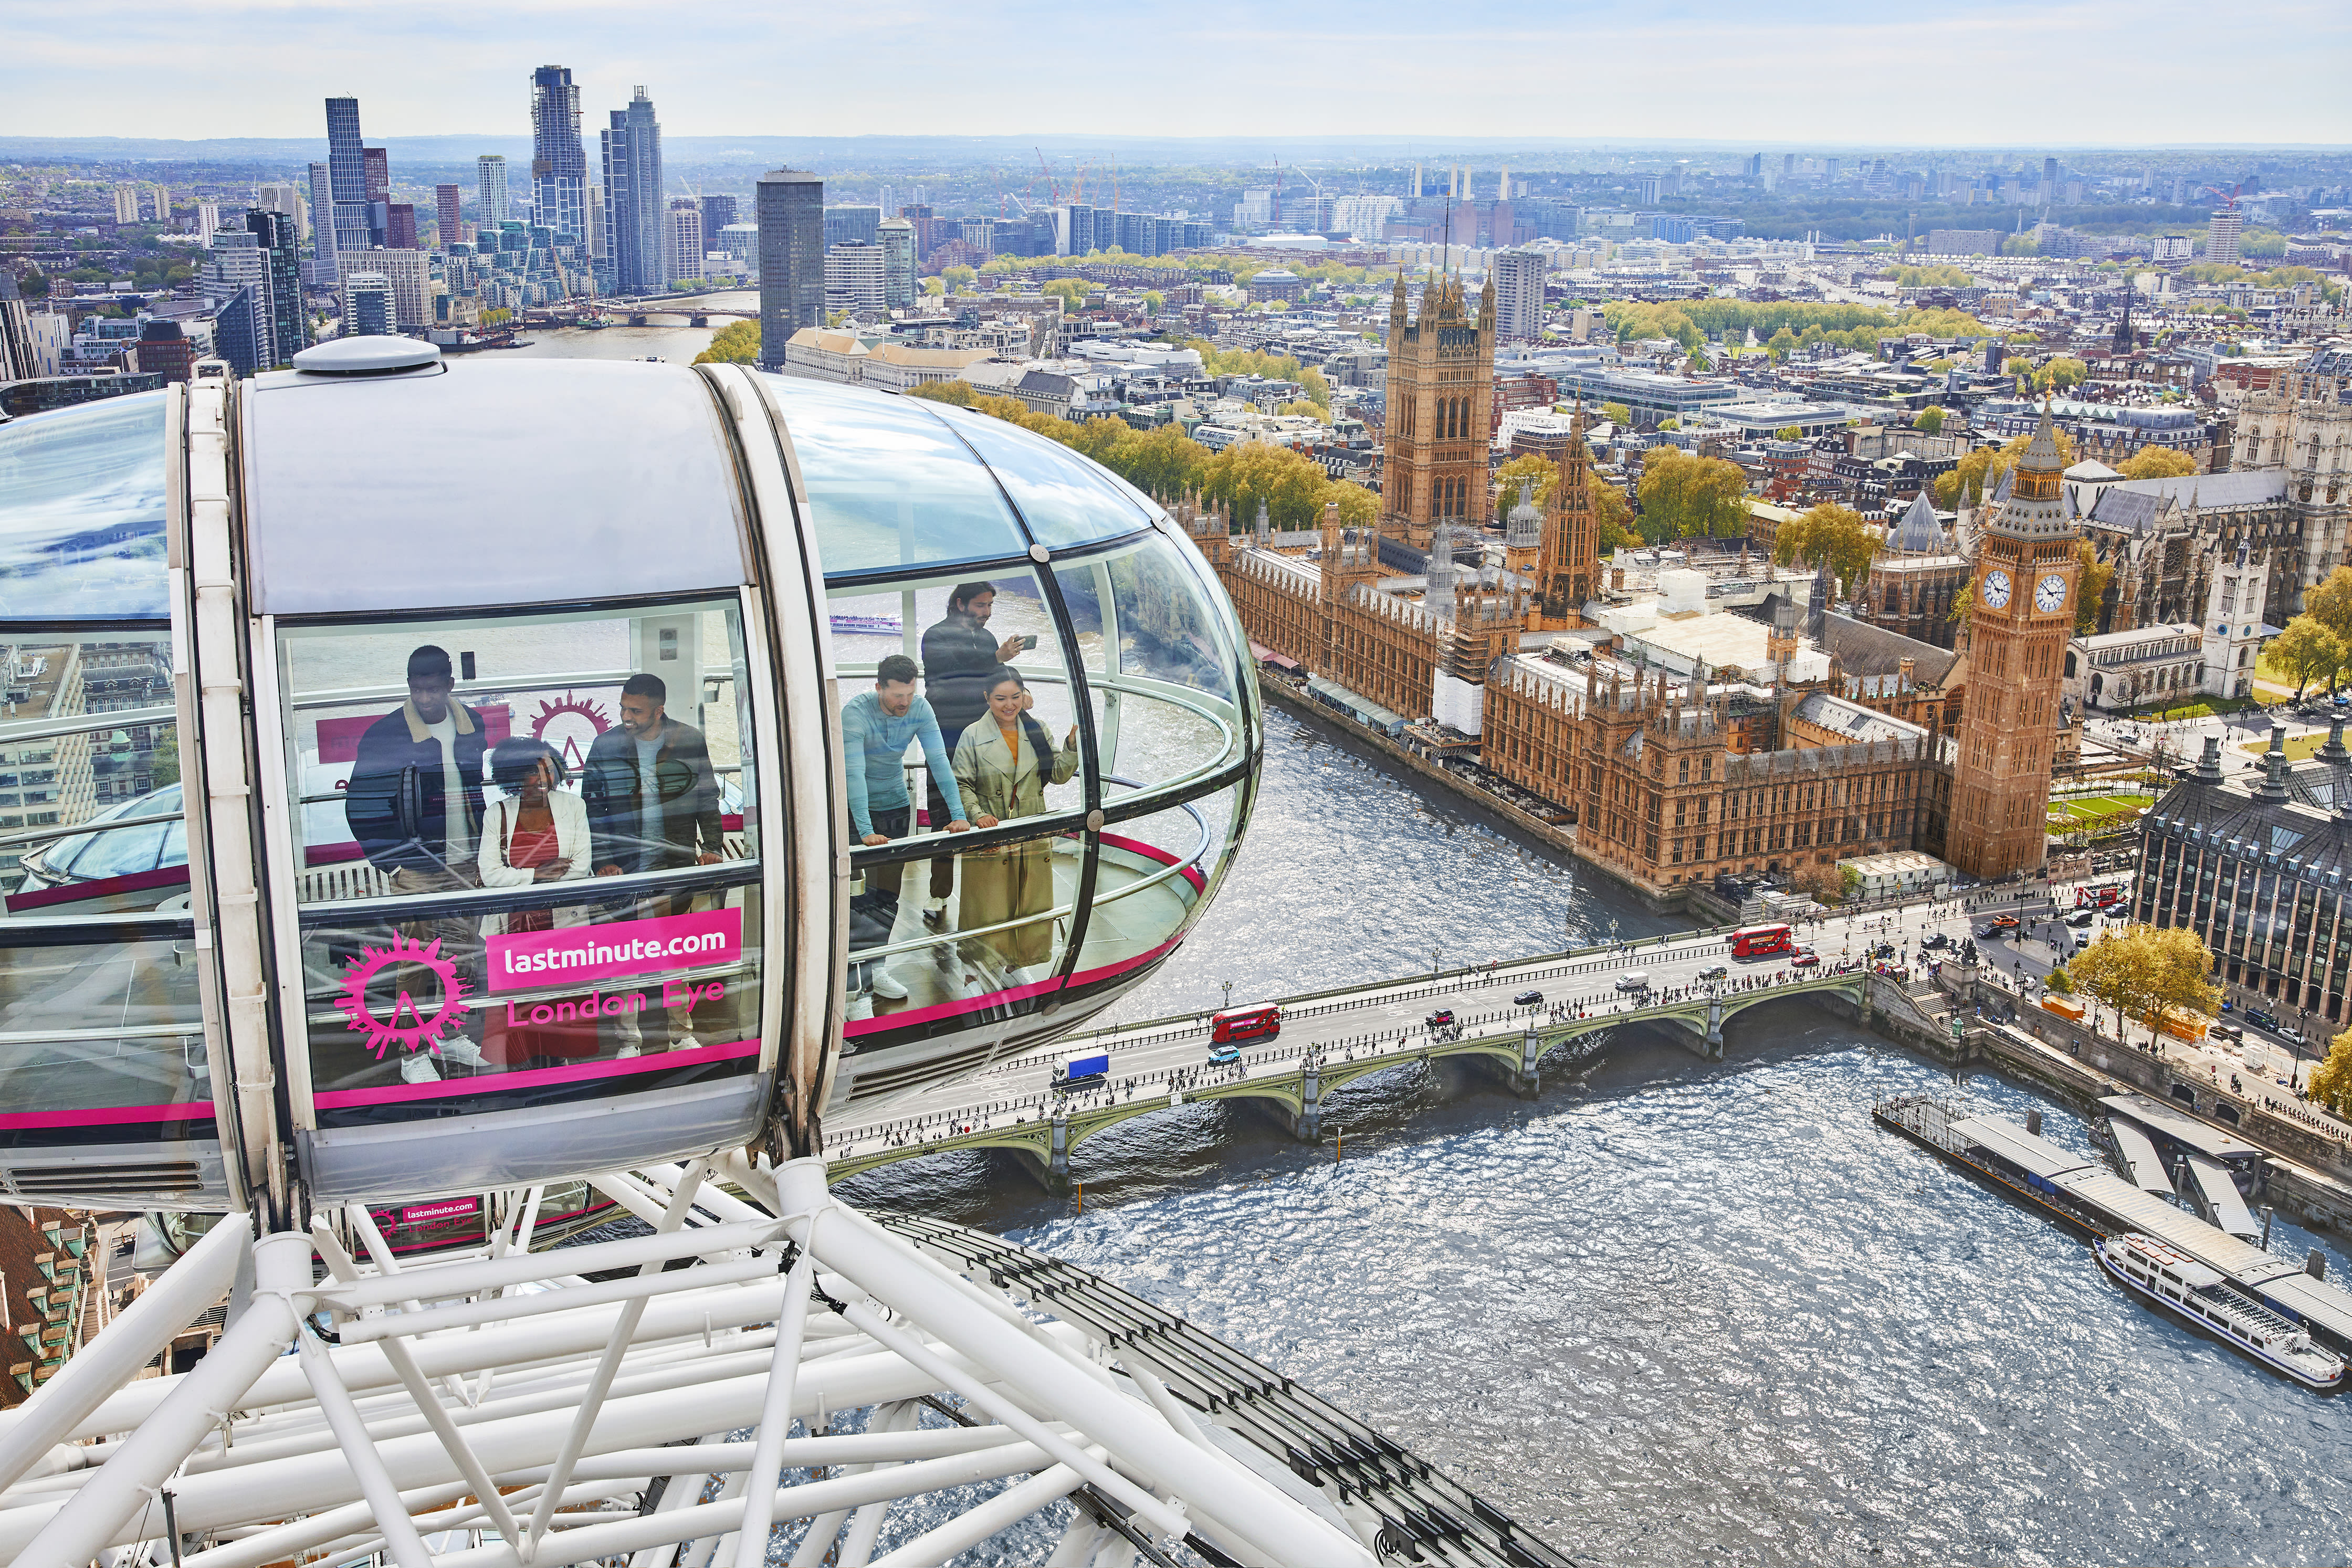 Wheelhouse And UK Theme Park Firm Merlin Entertainments Building Unscripted Slate Around London Eye And Other Iconic...